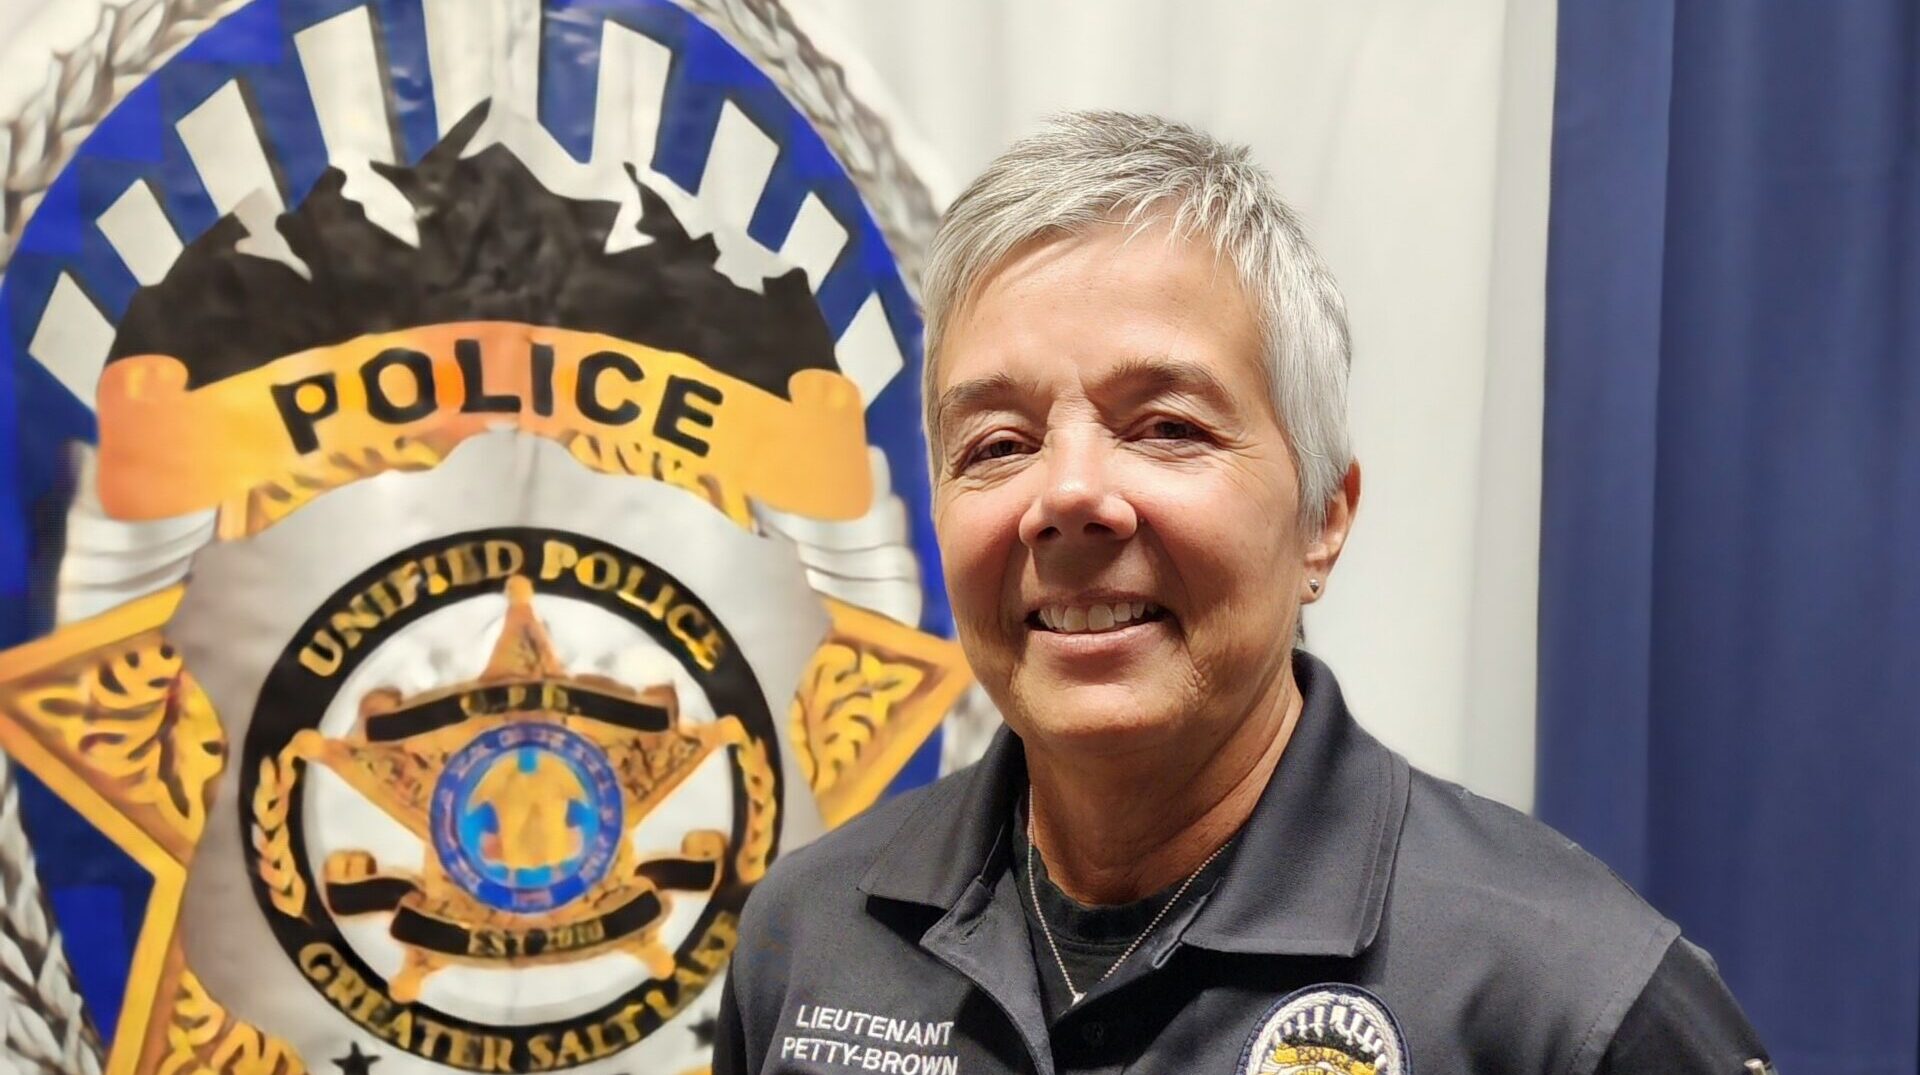 Christine Petty-Brown is pictured. She is the new Unified Police Department Millcreek Precinct Chie...